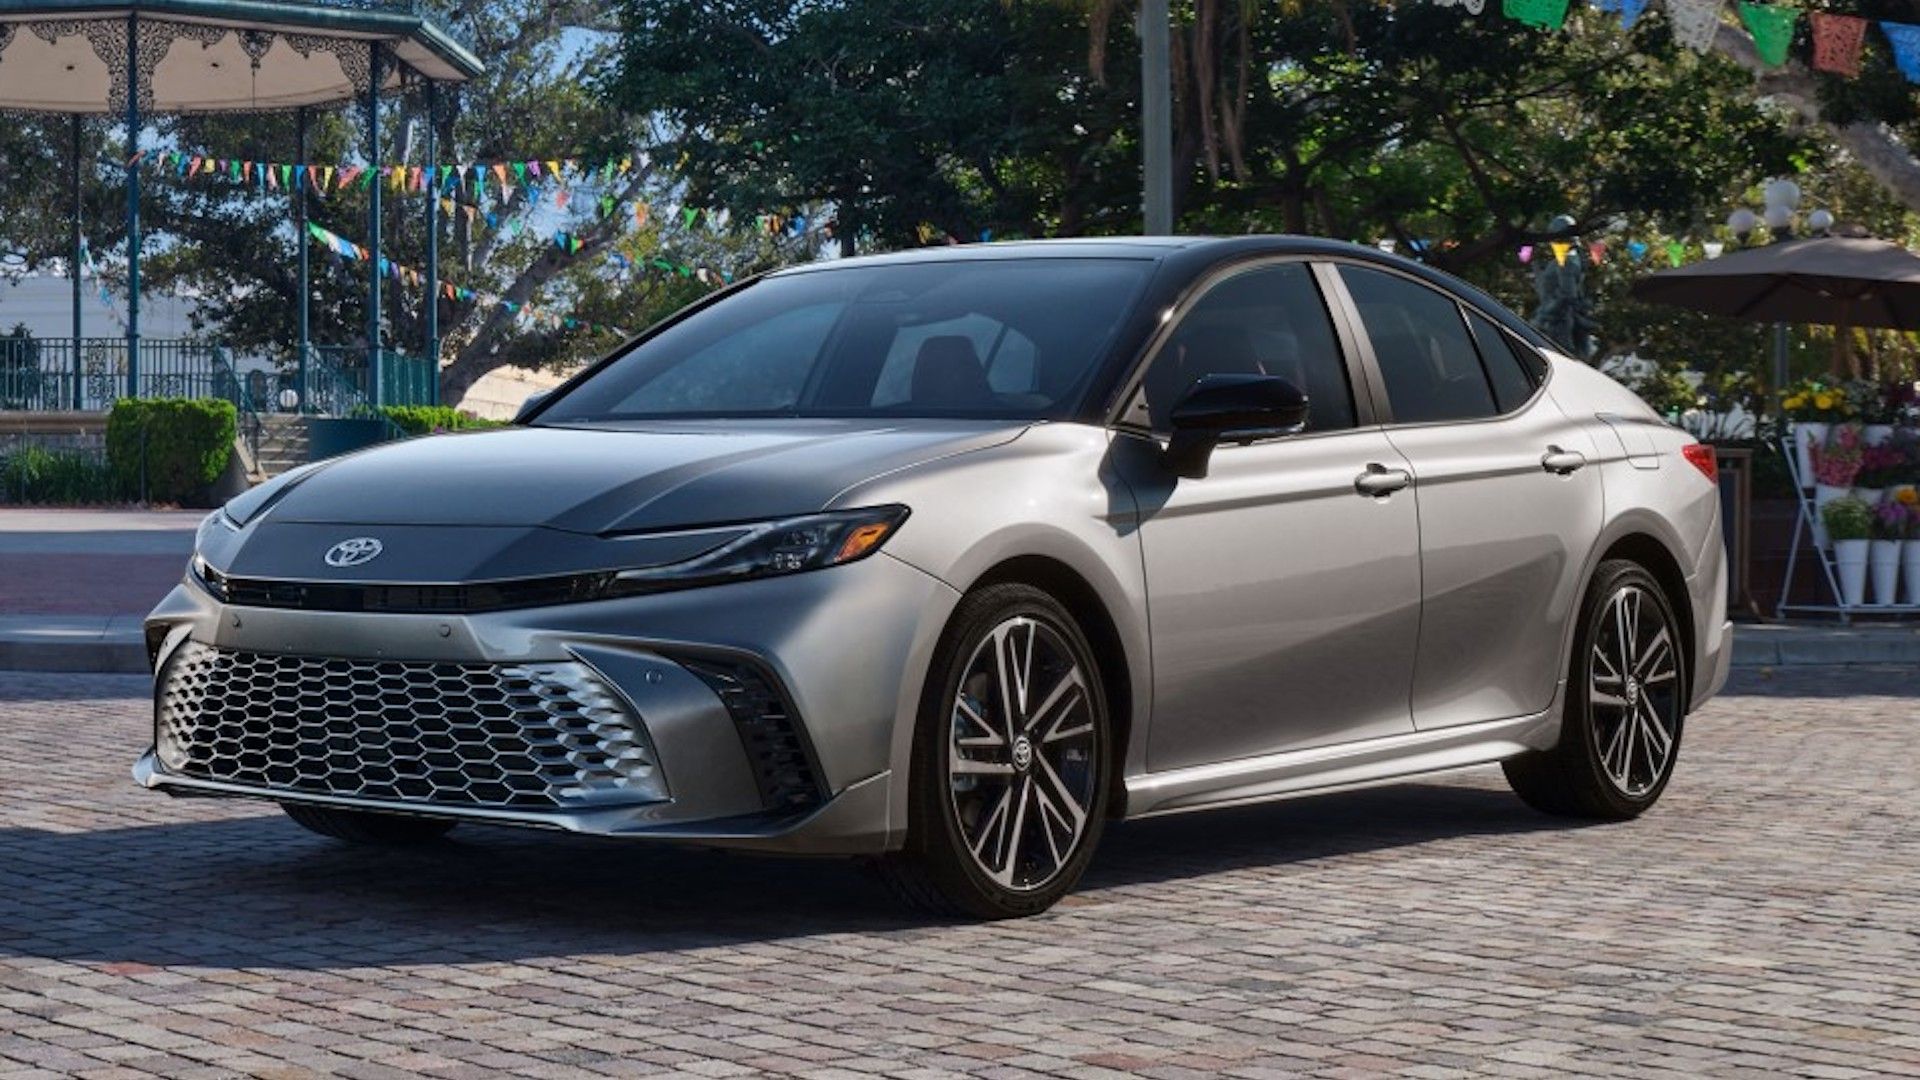 2025-toyota-camry-release-date-window-officially-confirmed